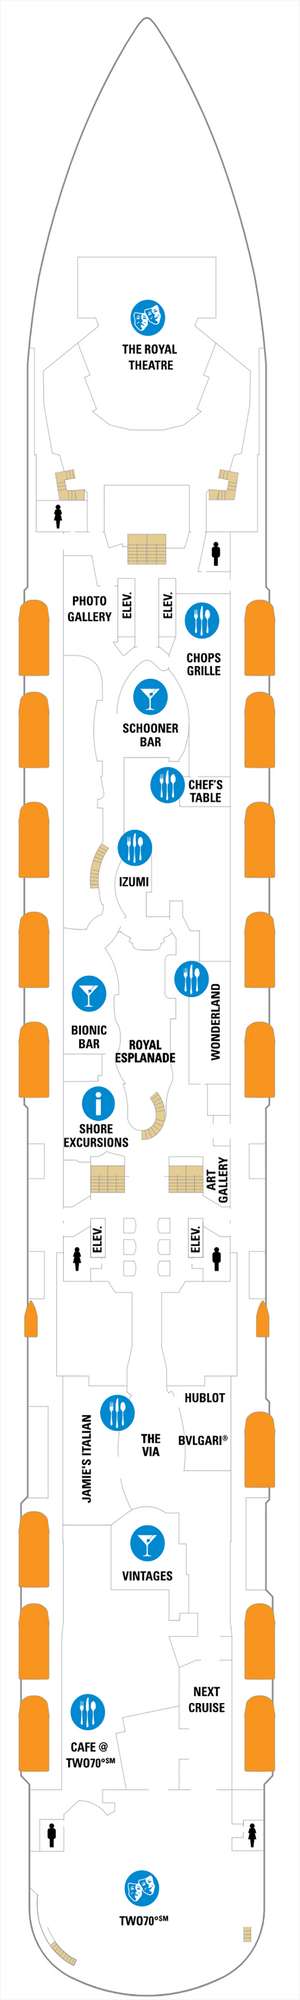 Deck plan for Anthem of the Seas